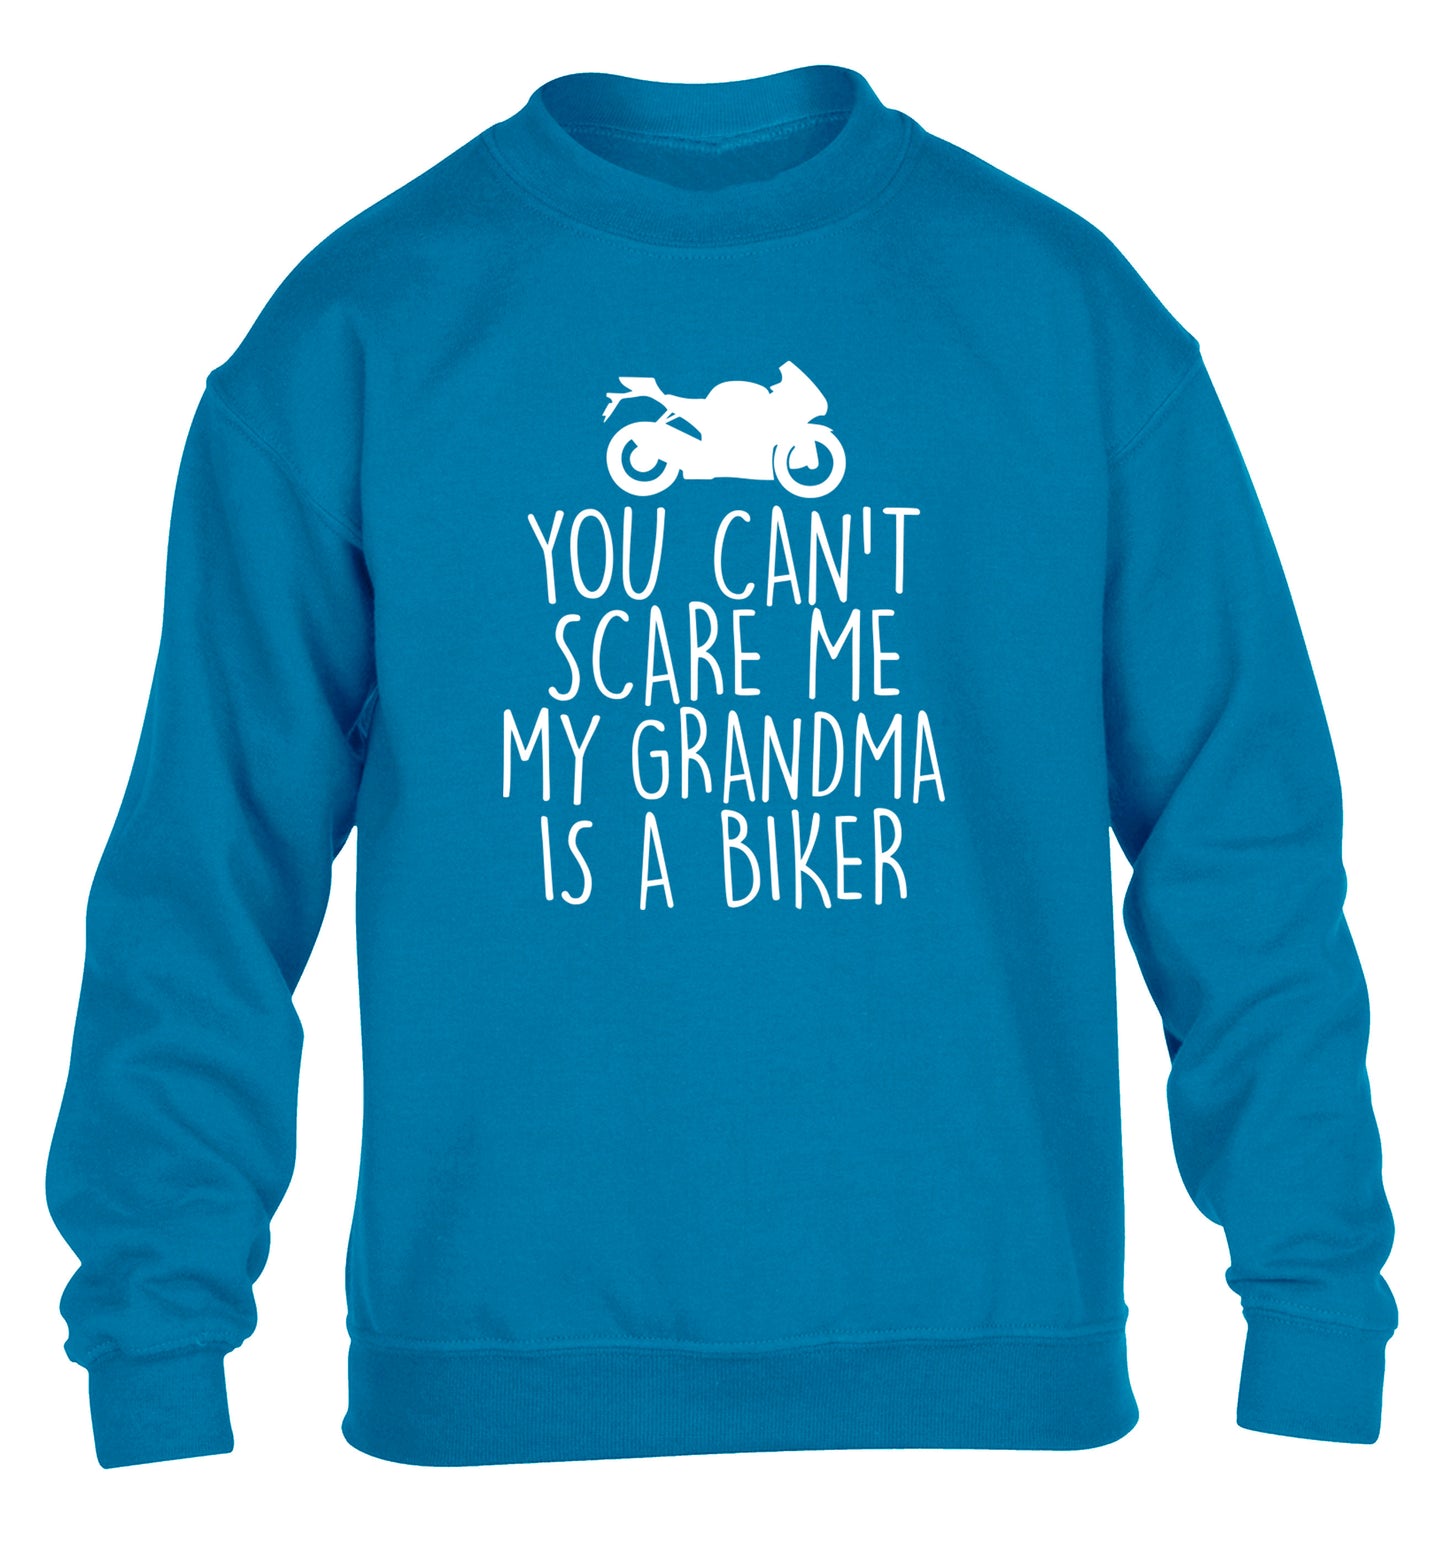 You can't scare me my grandma is a biker children's blue sweater 12-13 Years